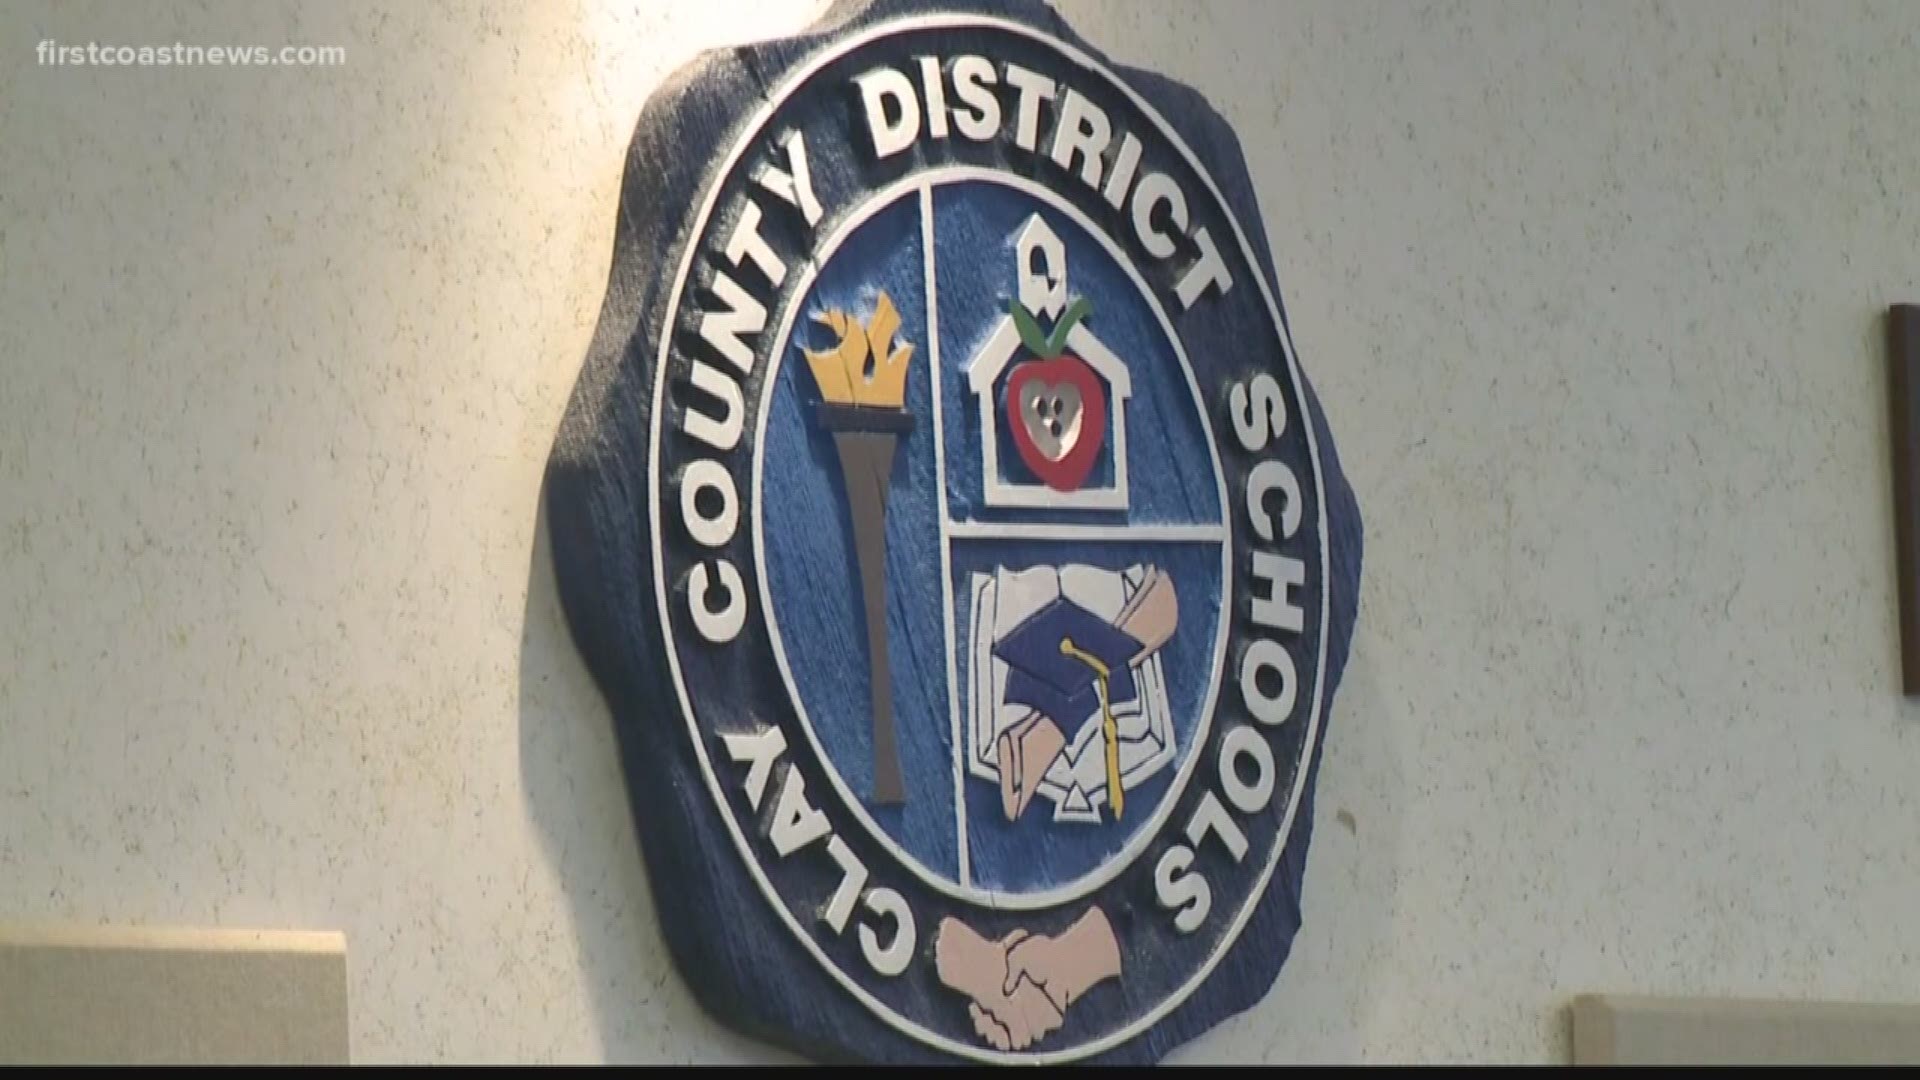 Around 36 officers and several supervisors are expected to be needed for the Clay County School District's police department.